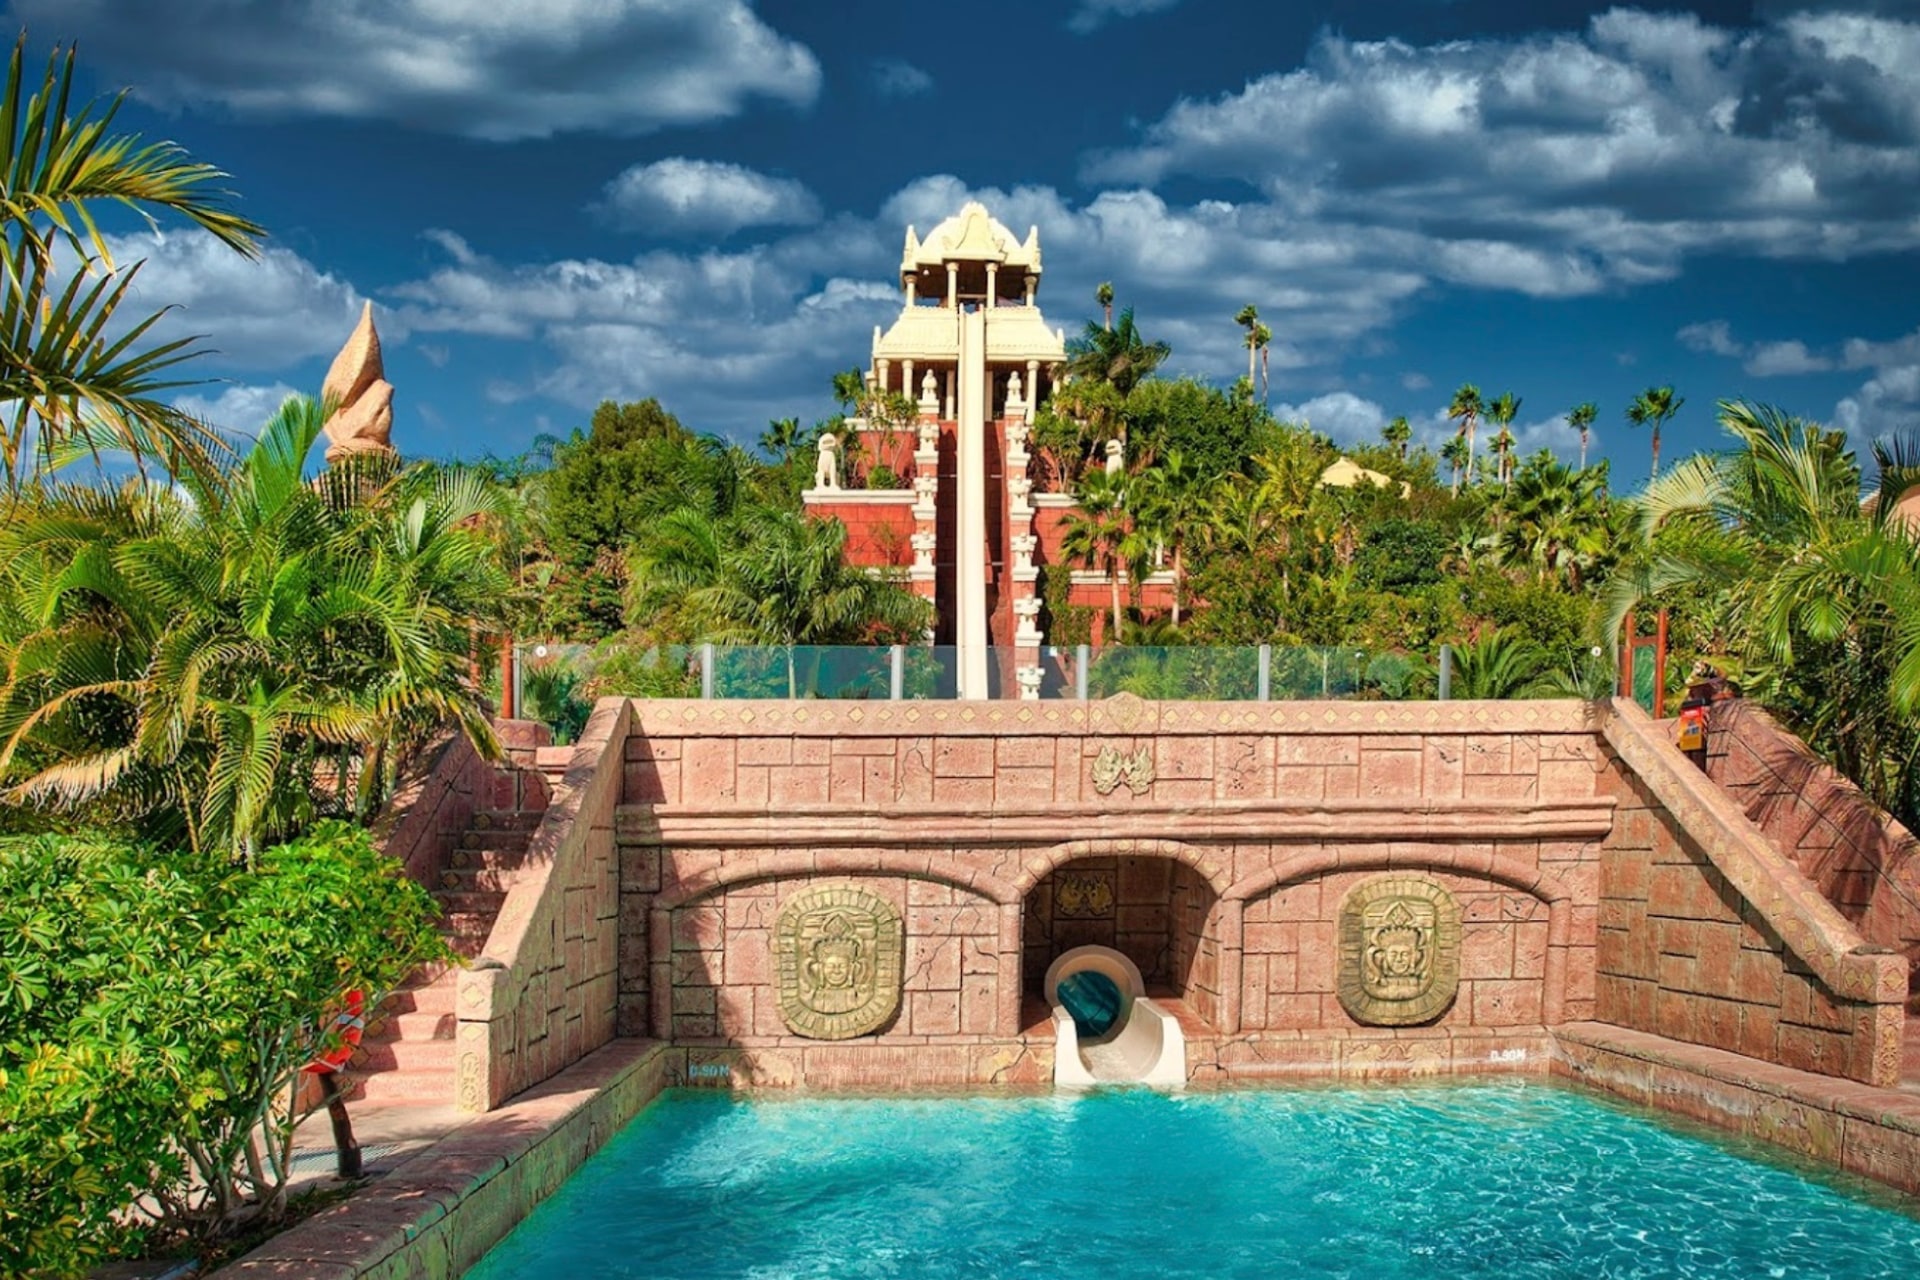 Vibrant lower view of the Tower of Power slide at Siam Park, Tenerife, against a clear blue sky